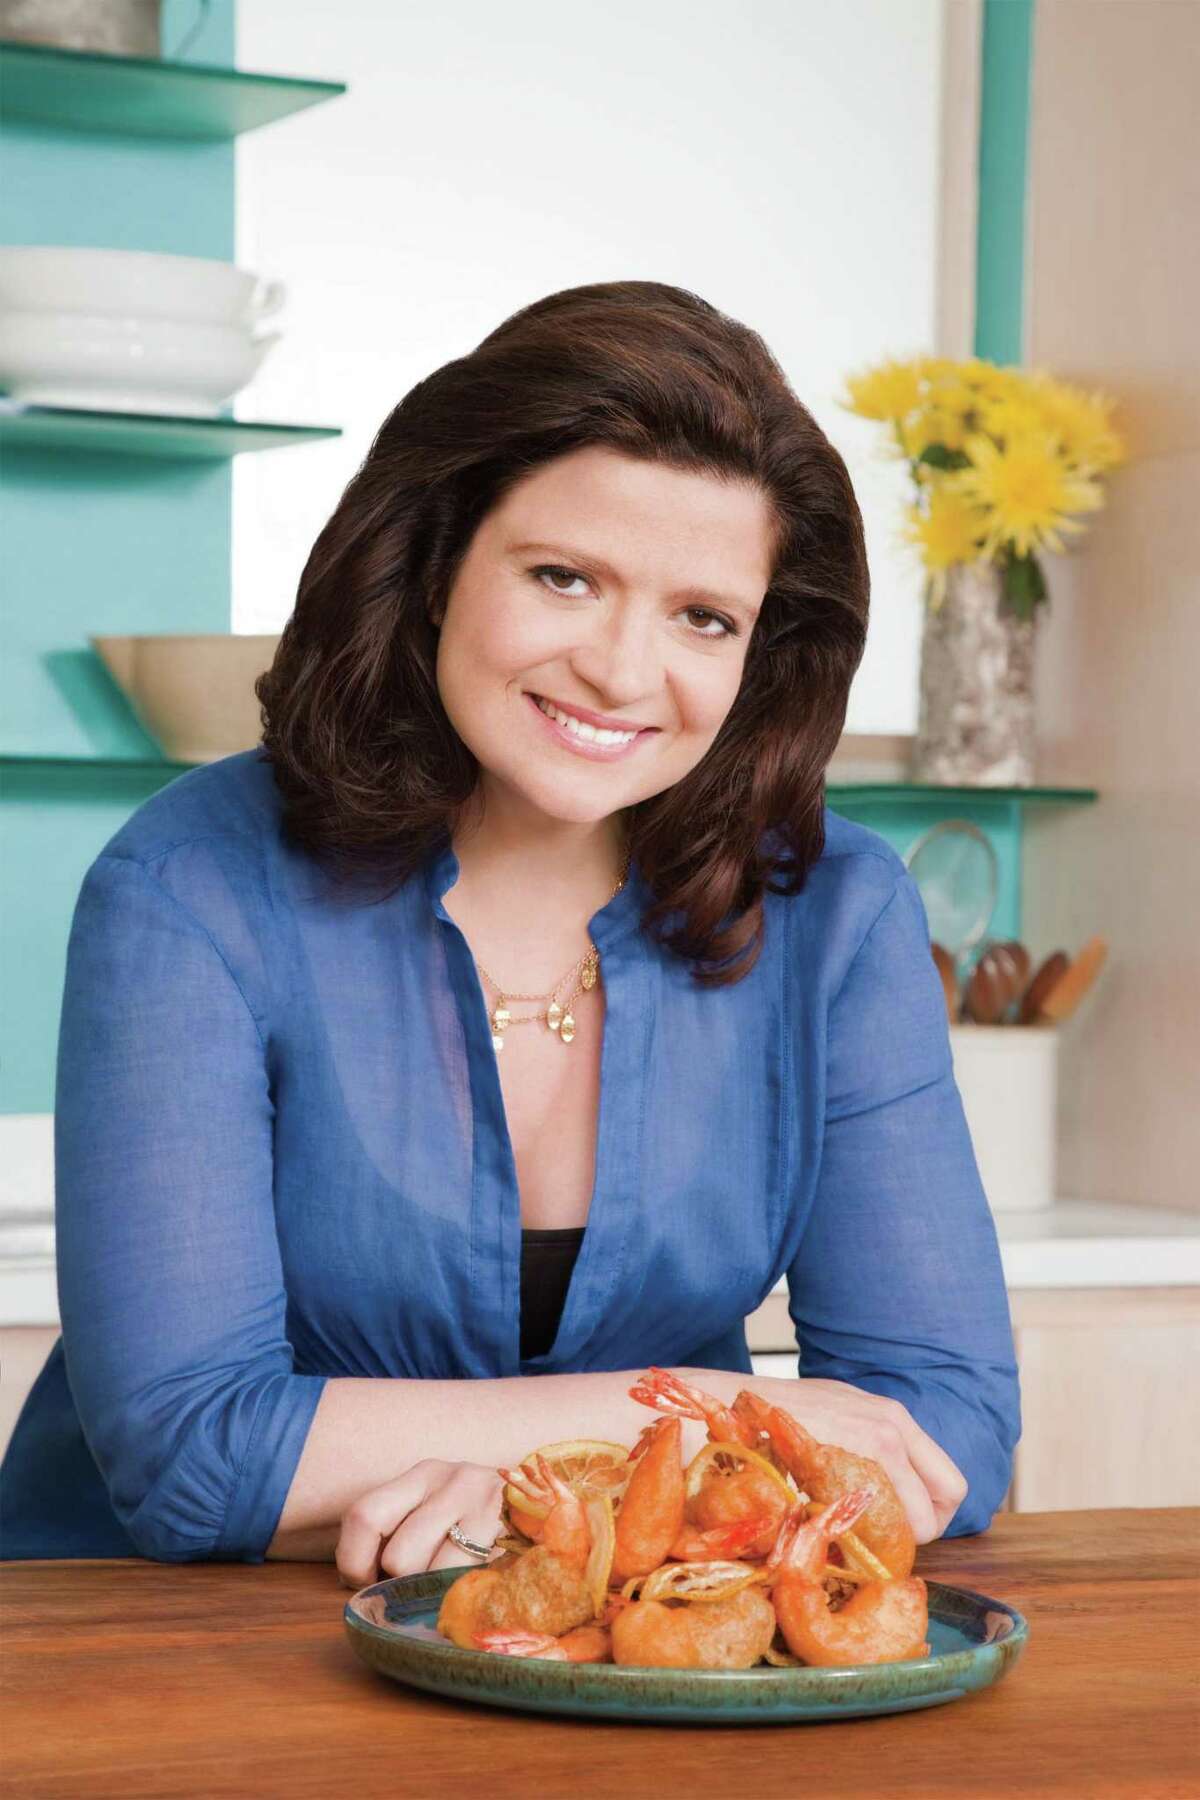 This photo released by the Food Network shows Alexandra Guarnaschelli. (AP Photo/Food Network)